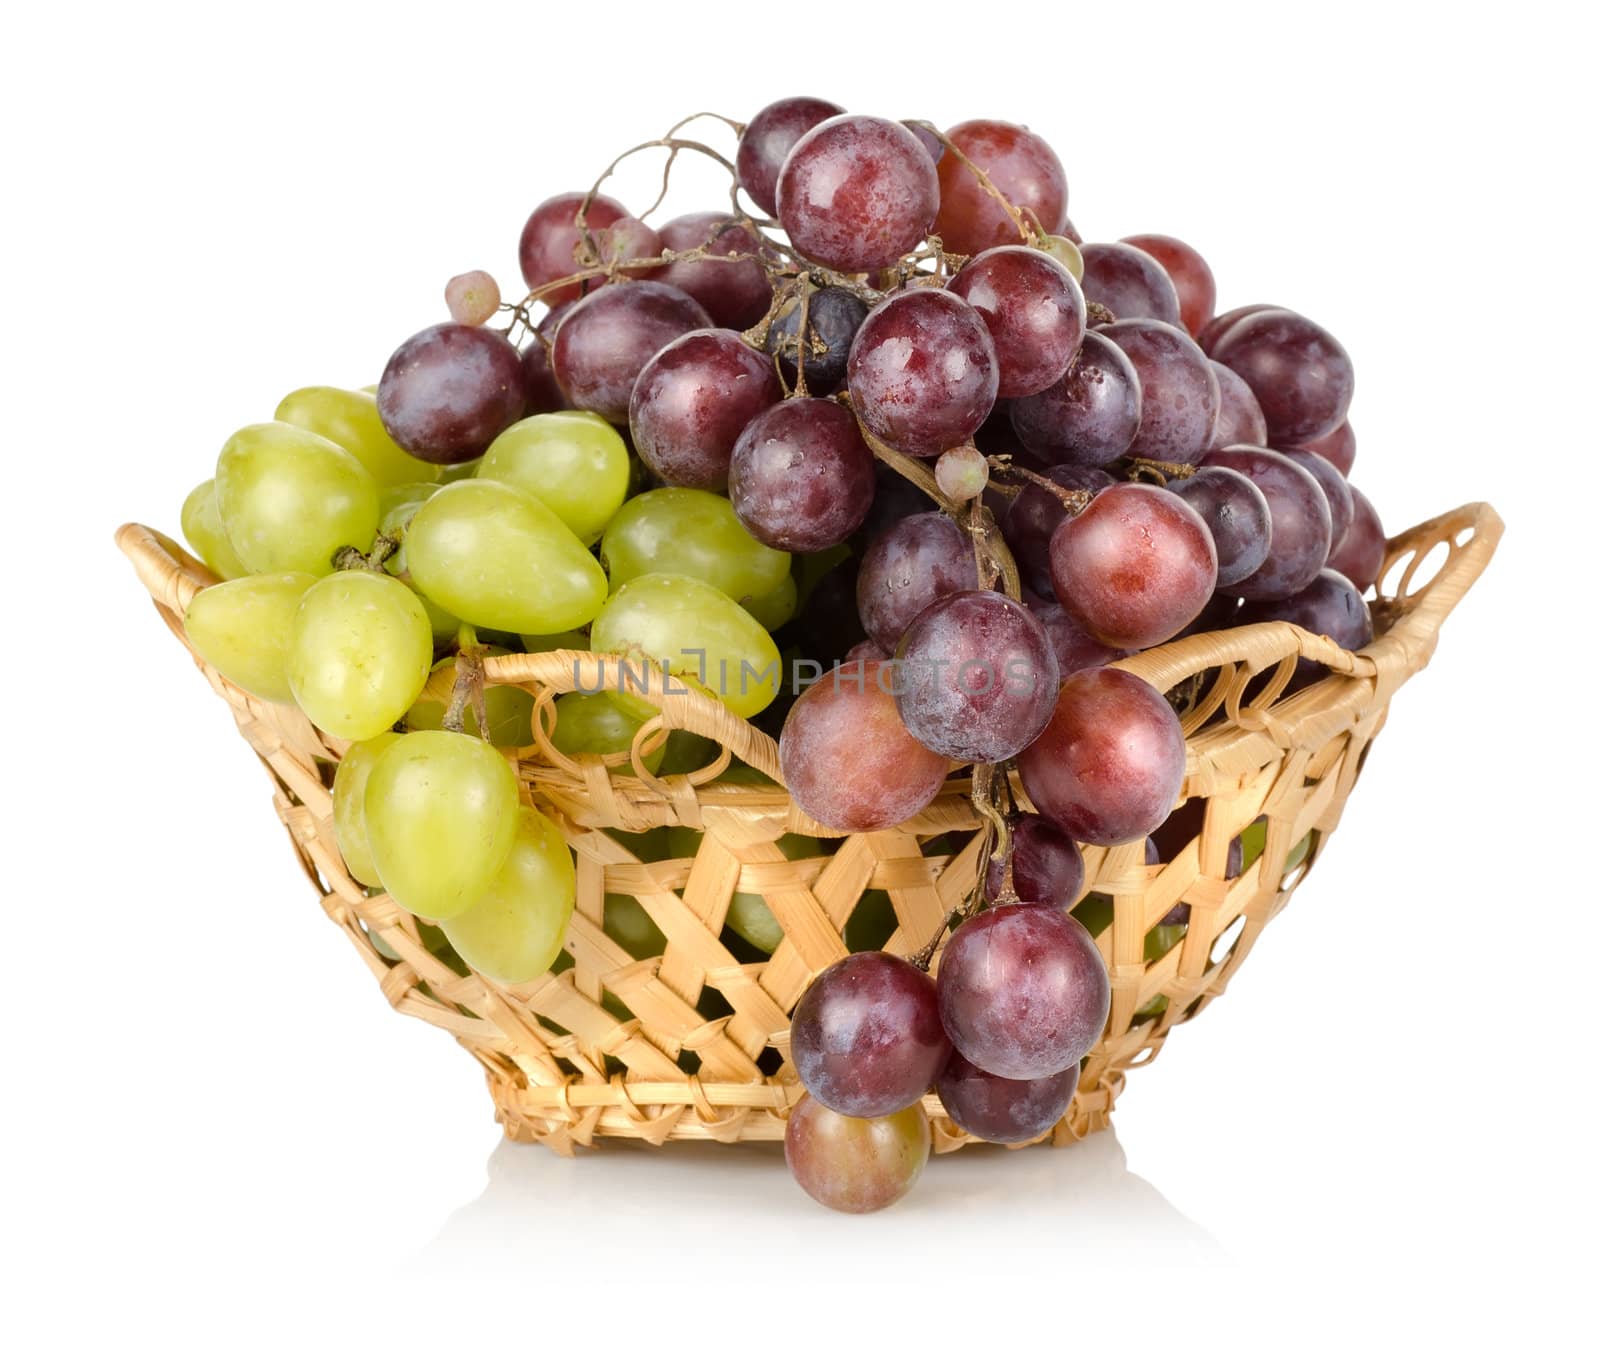 Green and blue grapes by Givaga